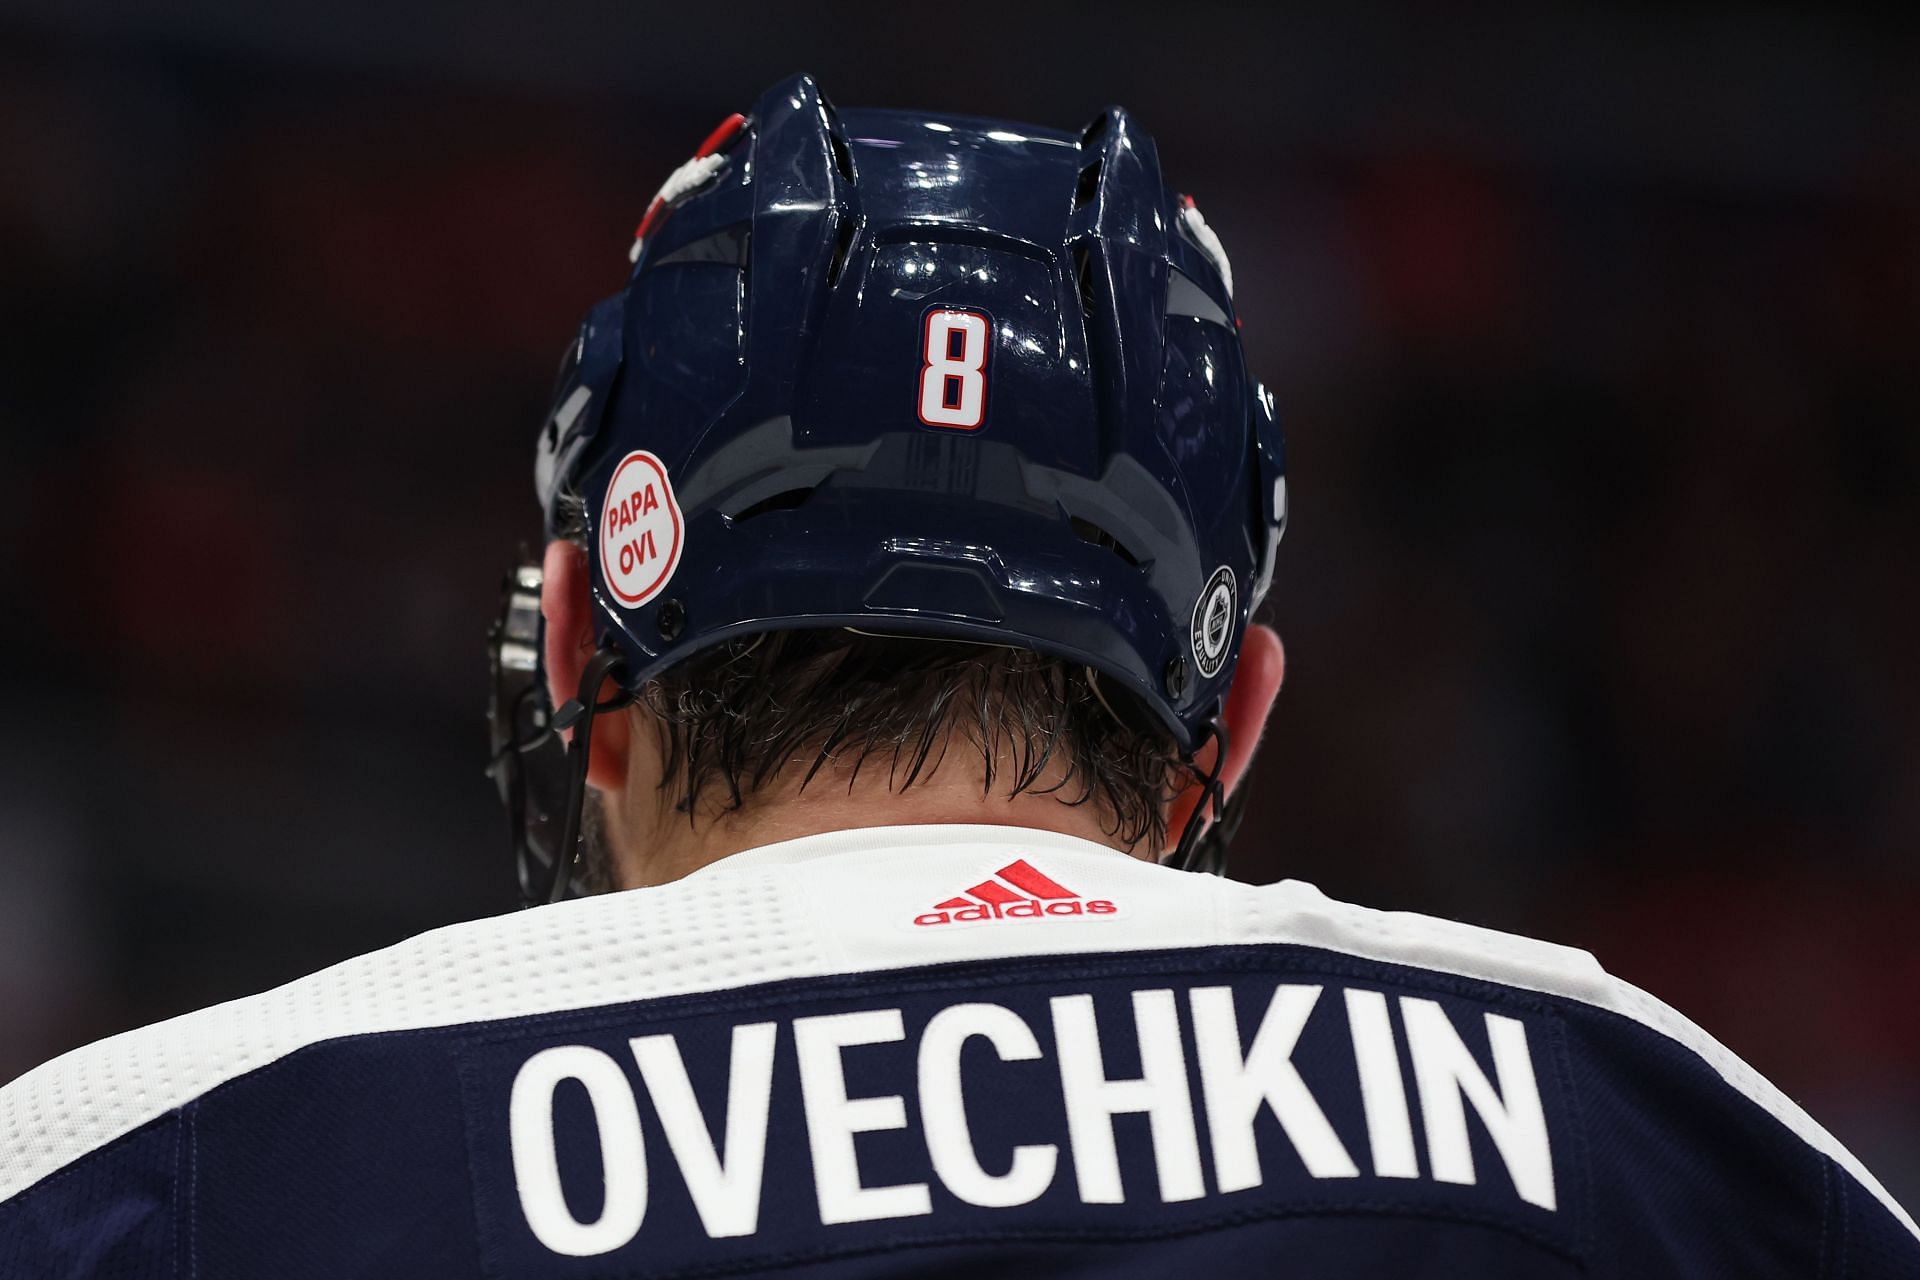 Alexander Ovechkin NHL Athletic Gear, NHL Active Equipment